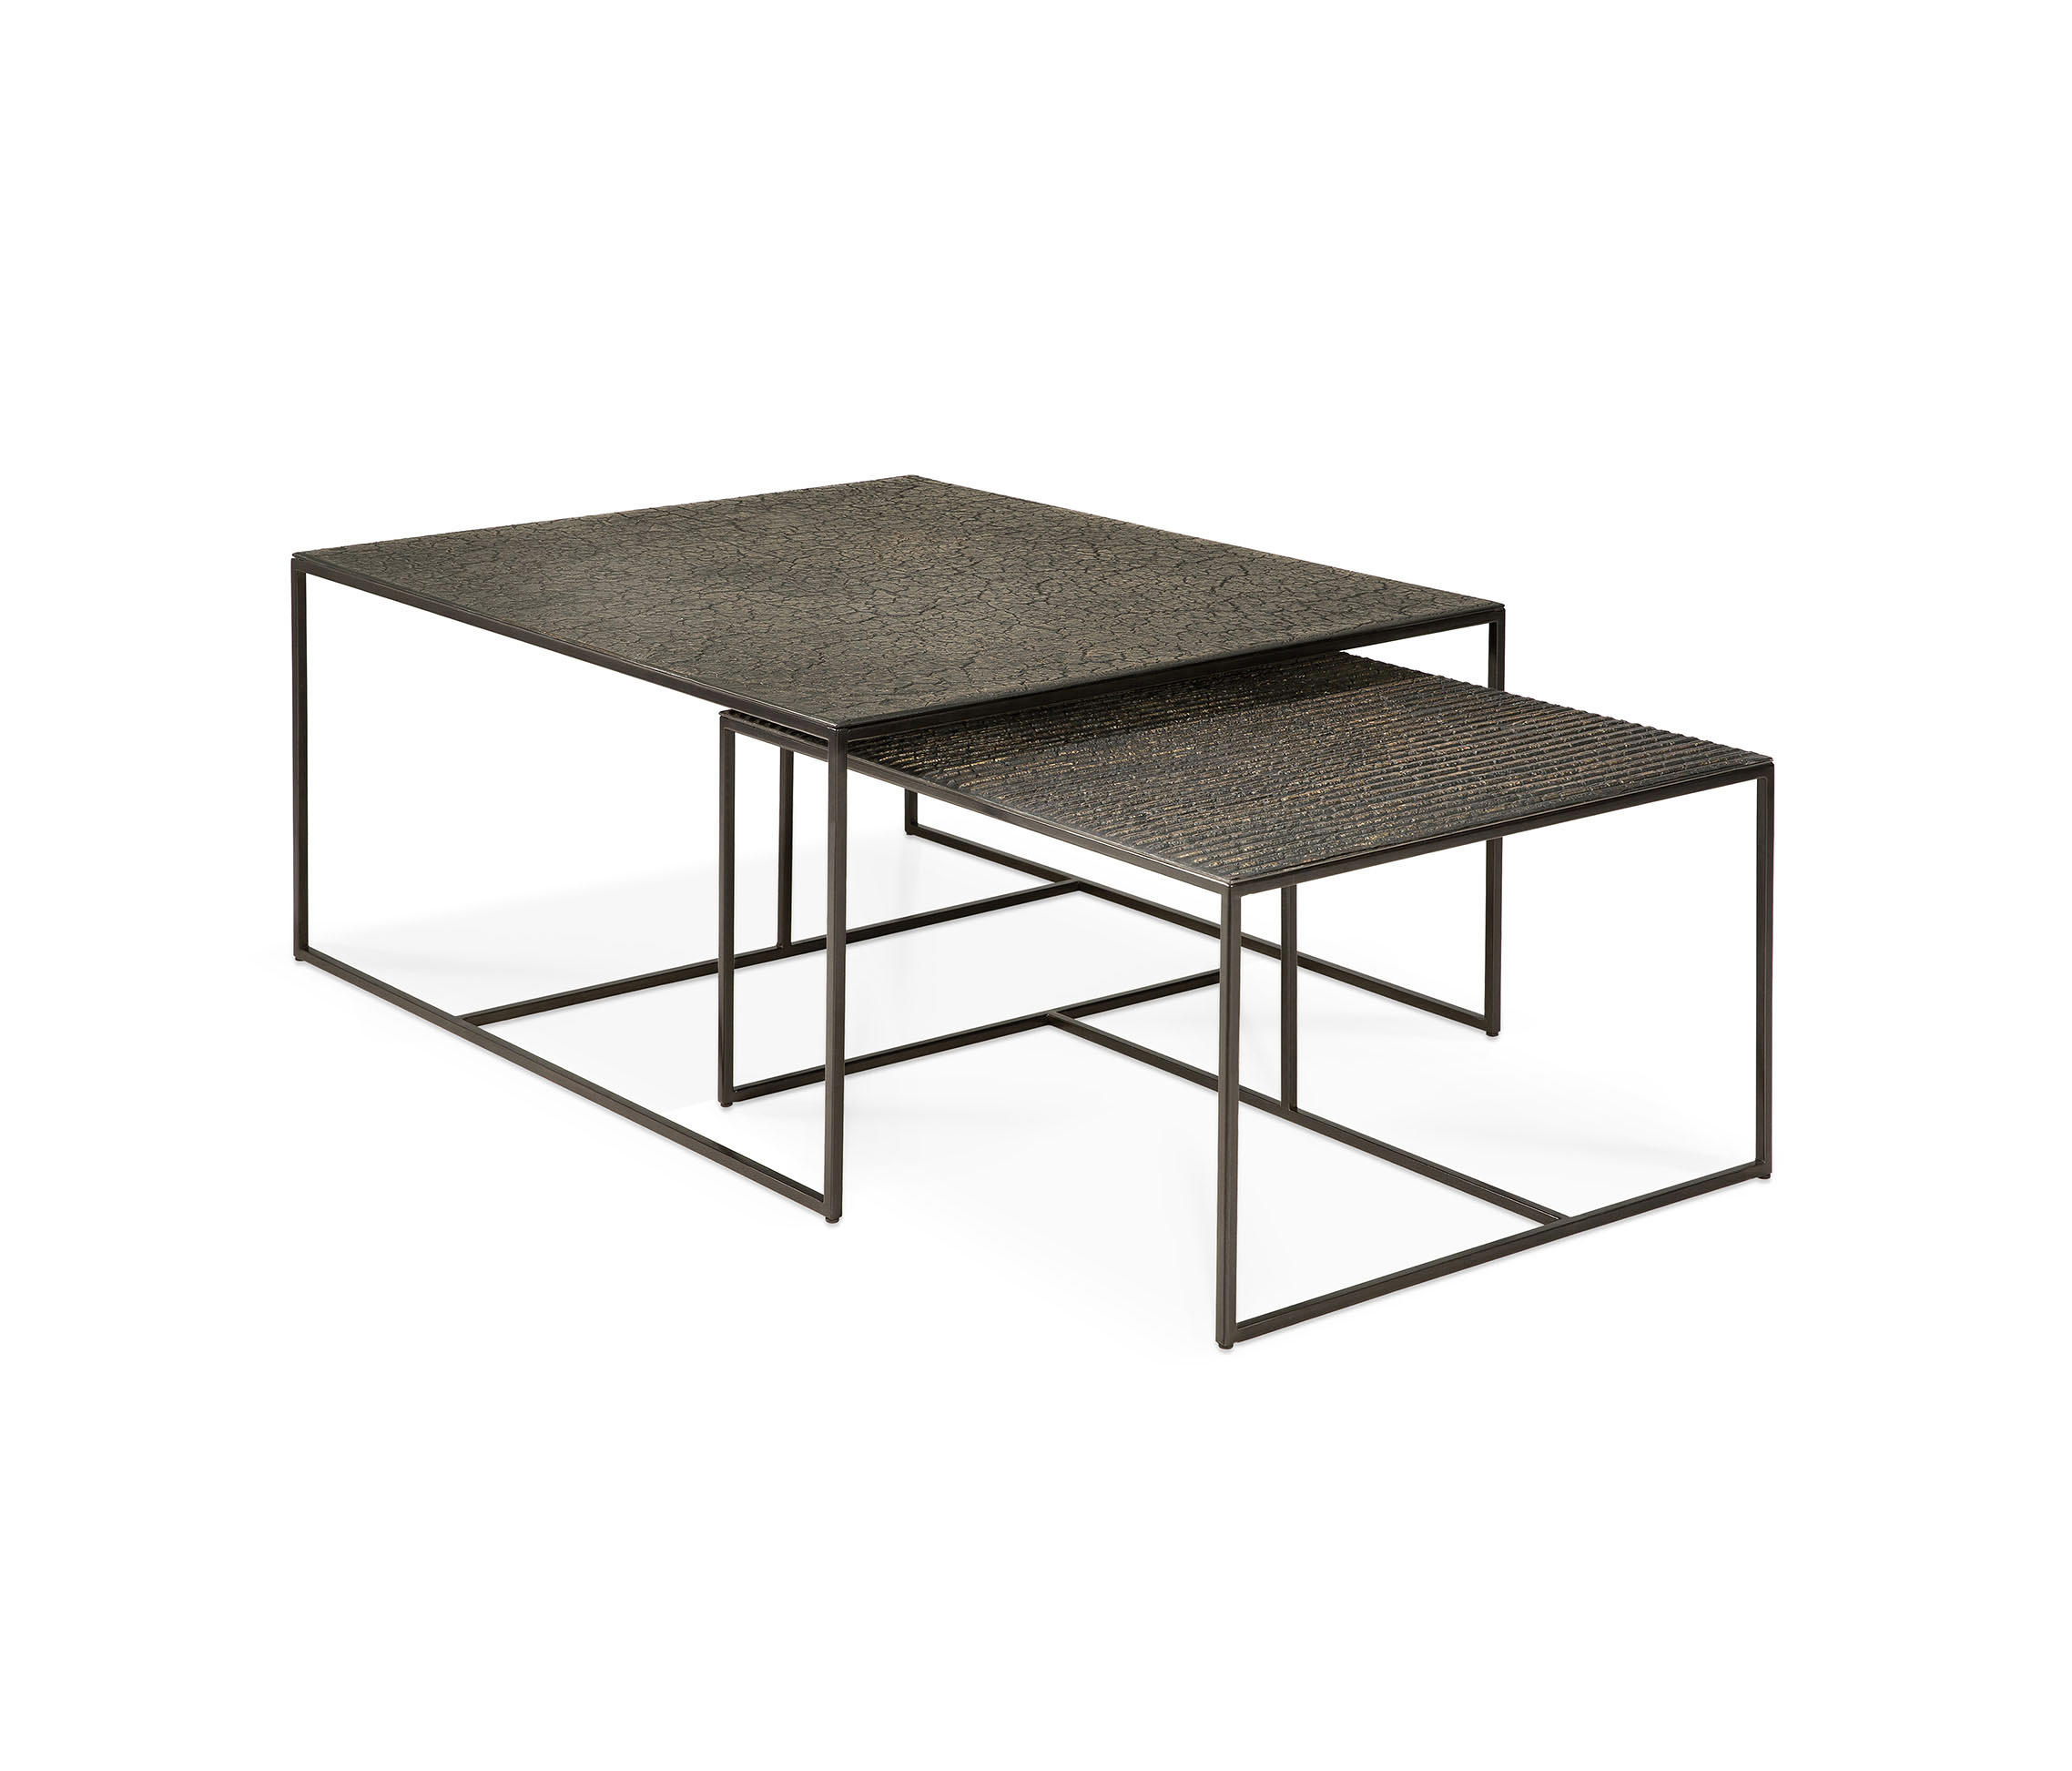 Pentagon Tables by Ethnicraft